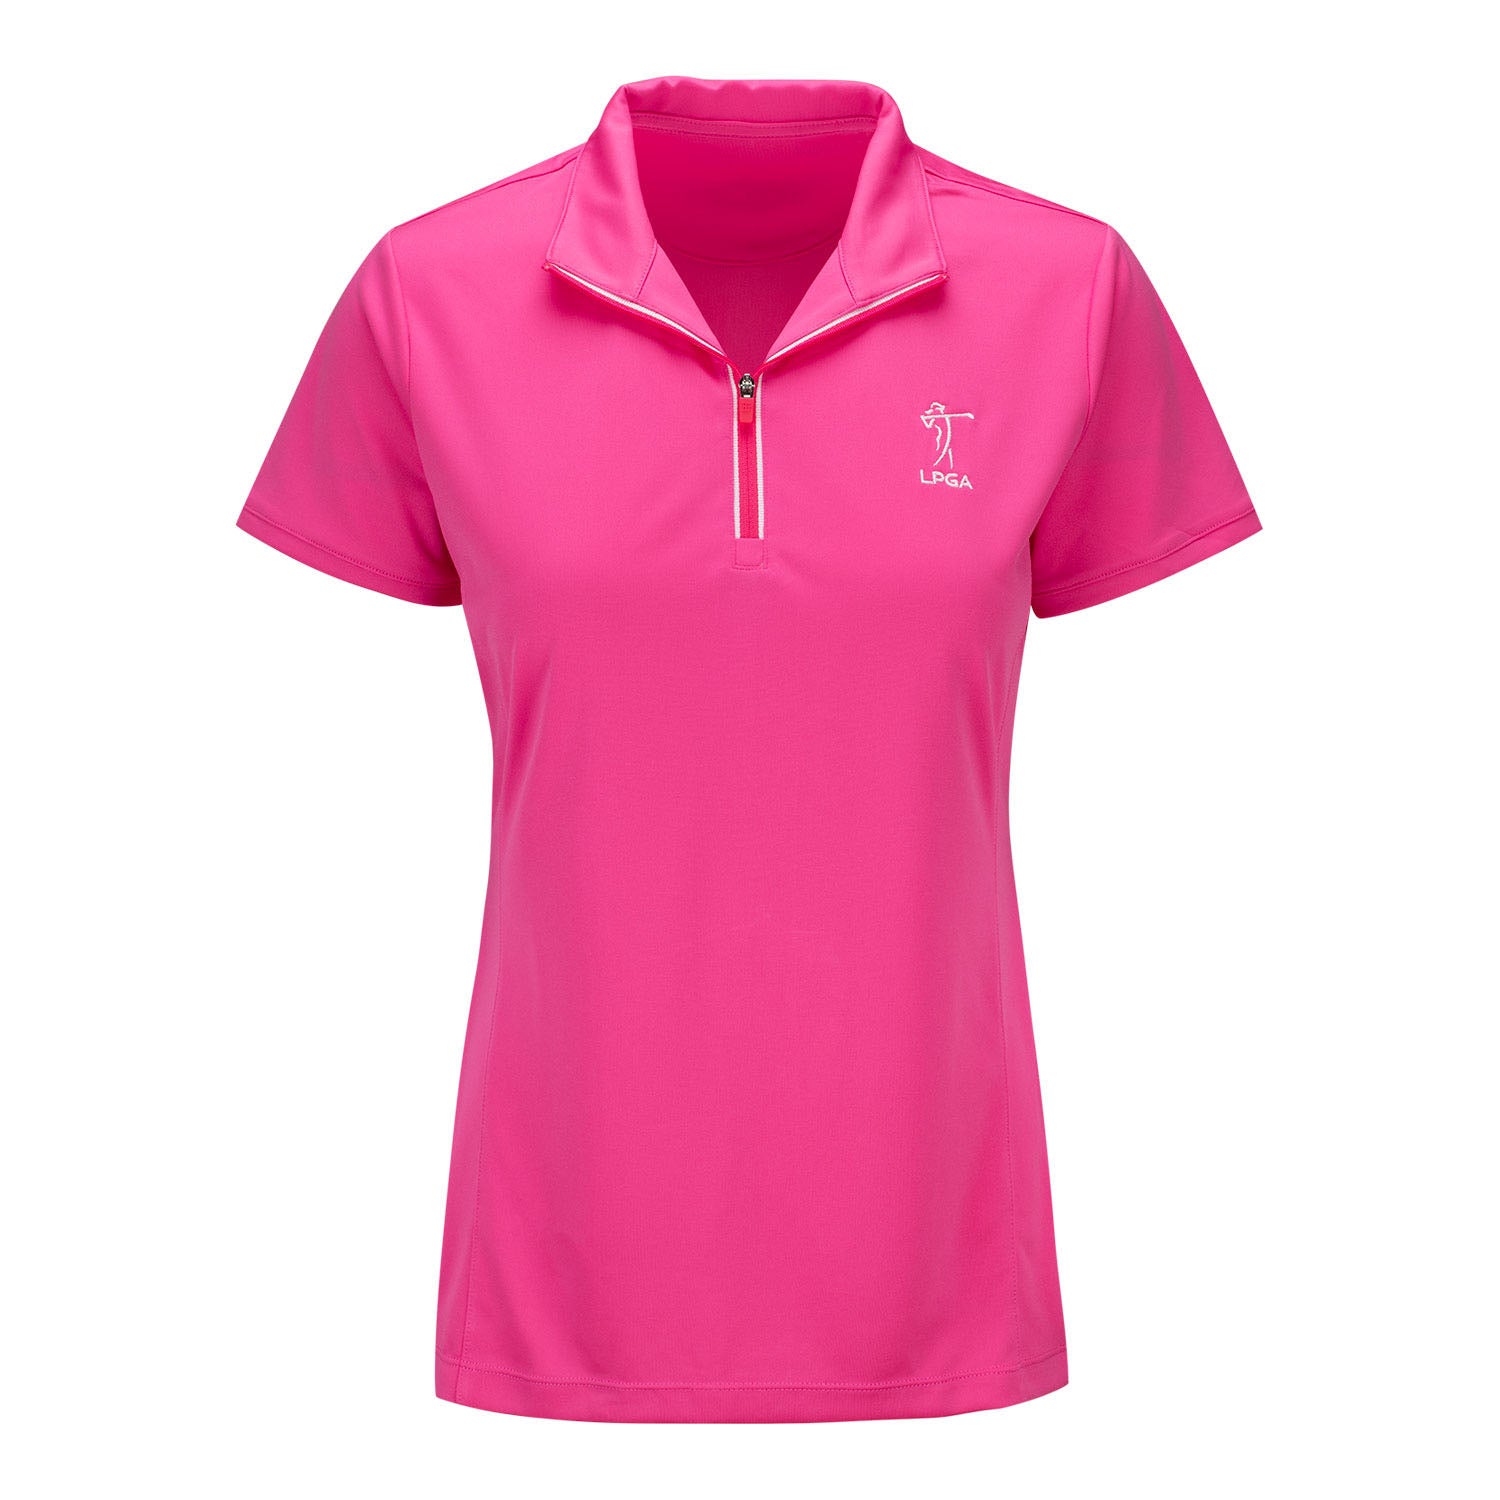 EP Pro LPGA Golf Short Sleeve Convertible Zip Polo in Pink - Front View